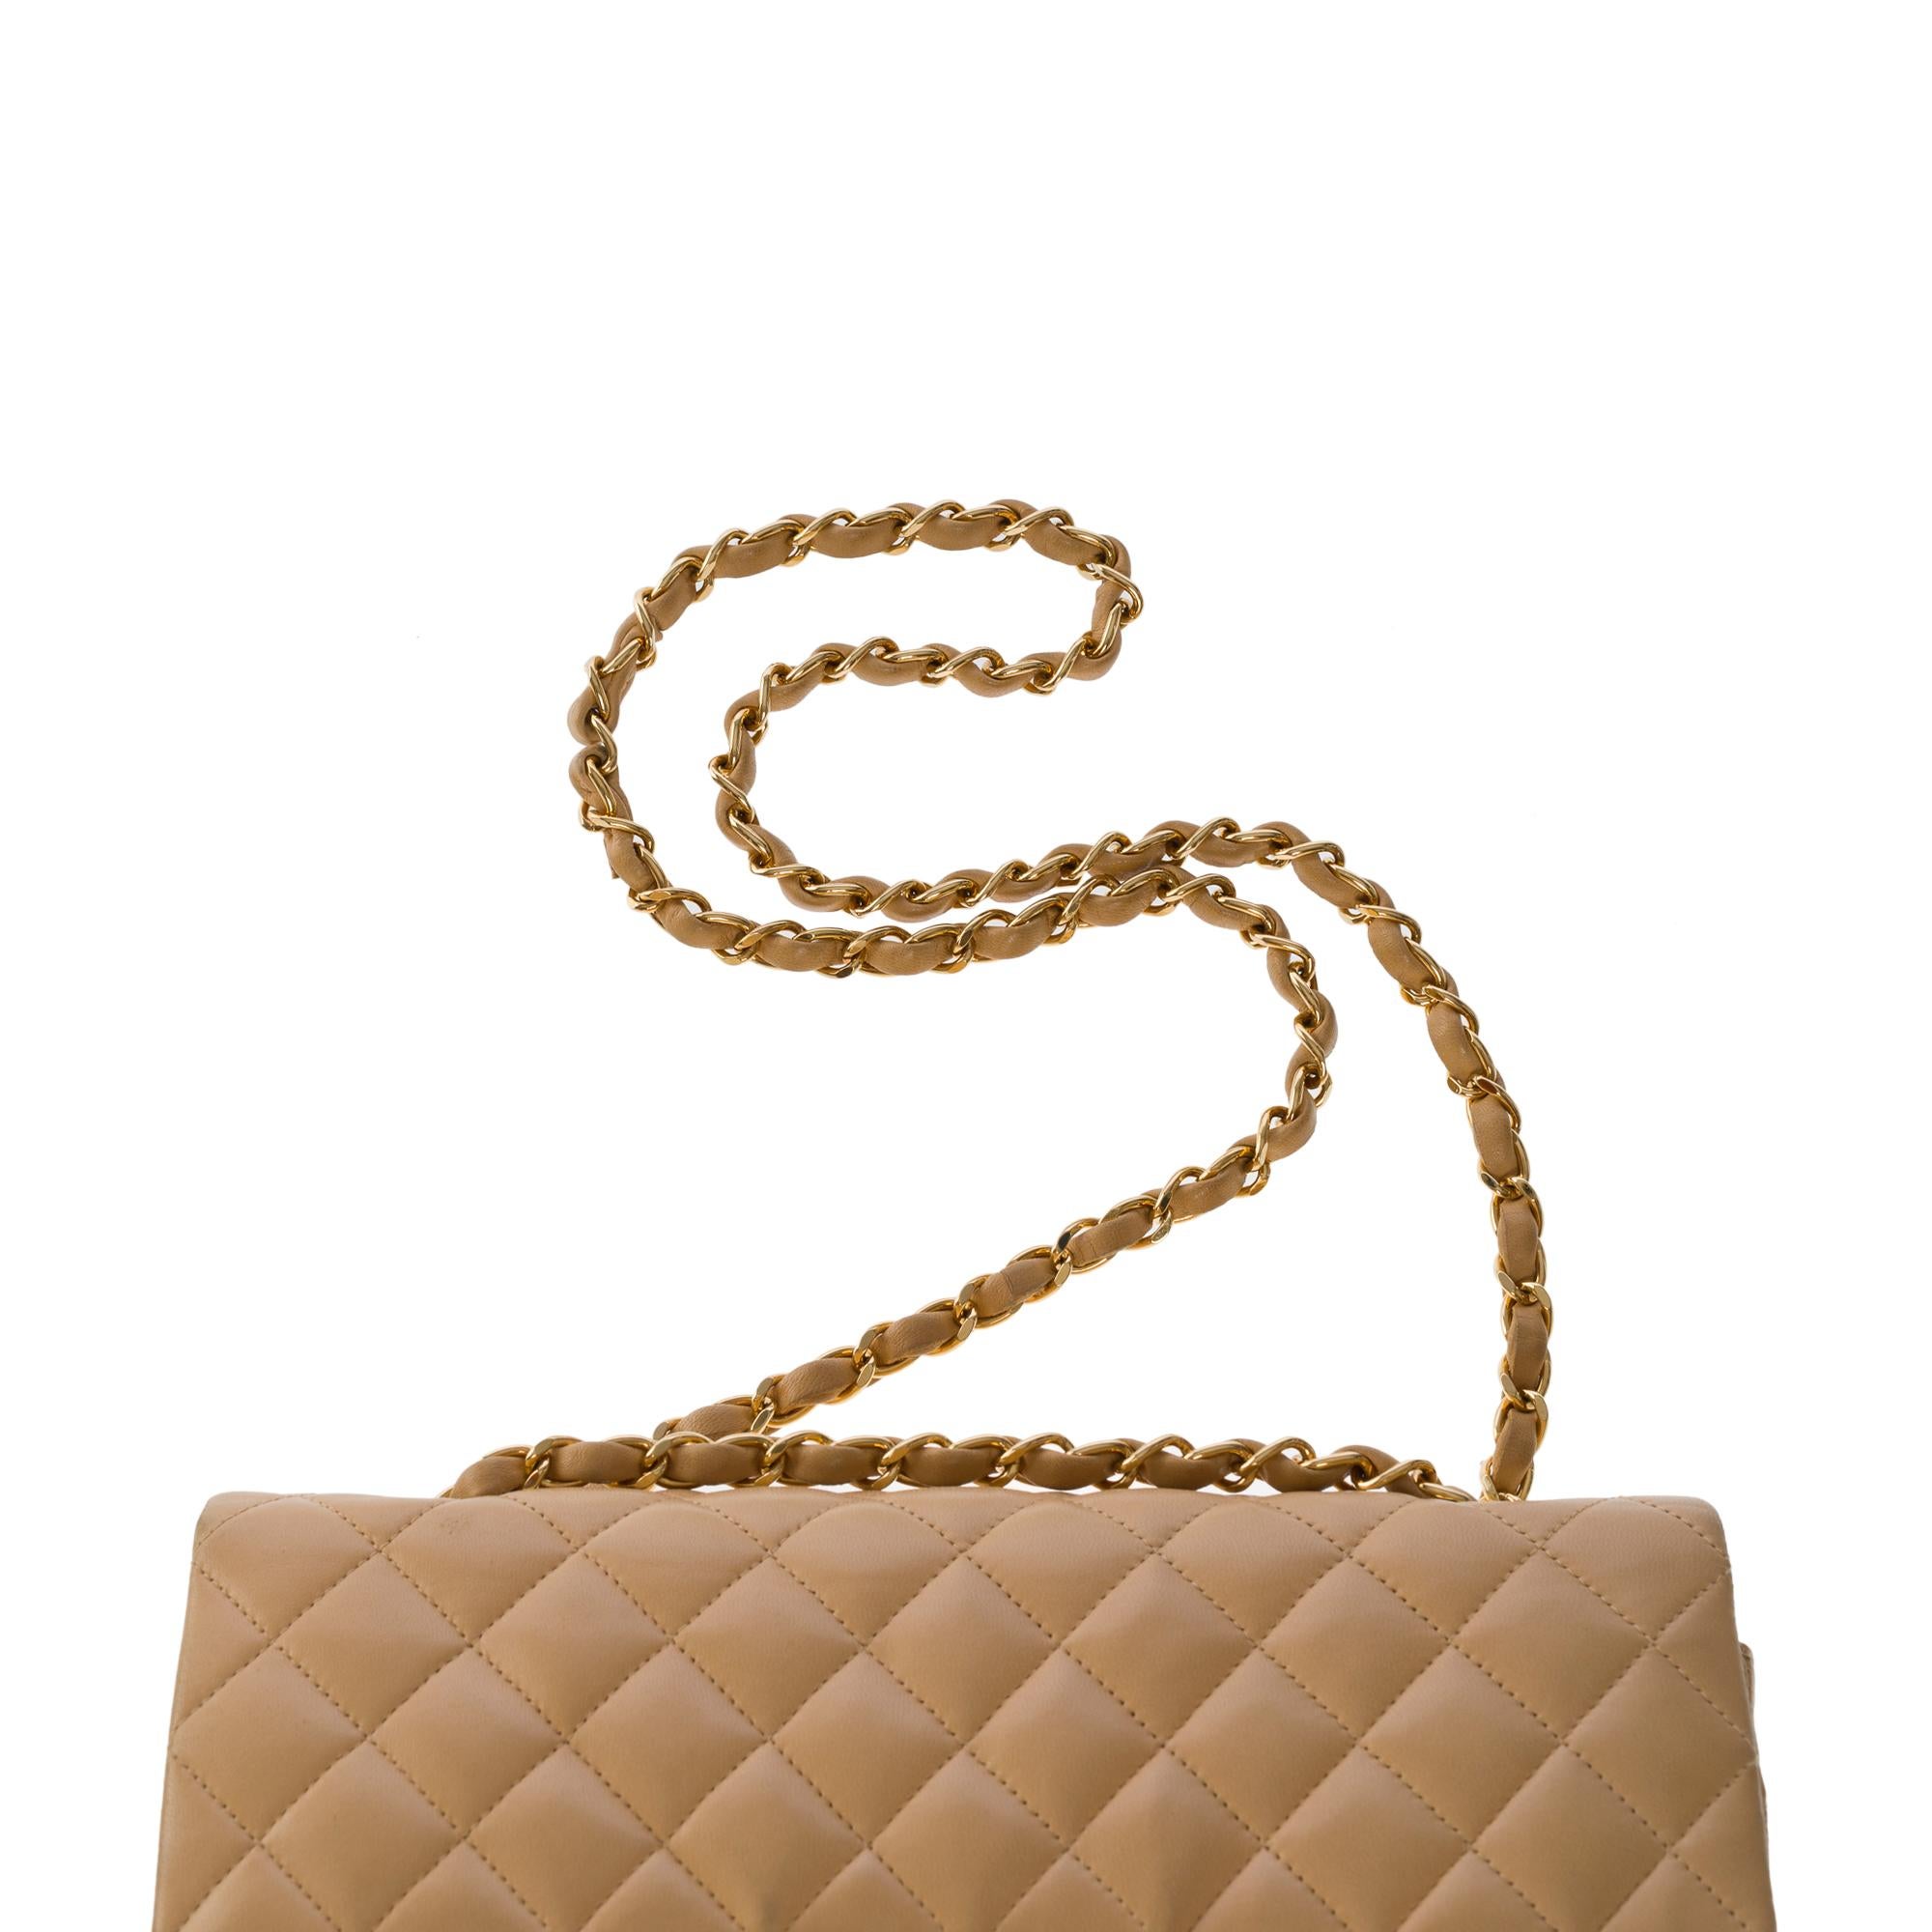 Chanel Timeless medium double flap shoulder bag in beige quilted lambskin, GHW For Sale 5